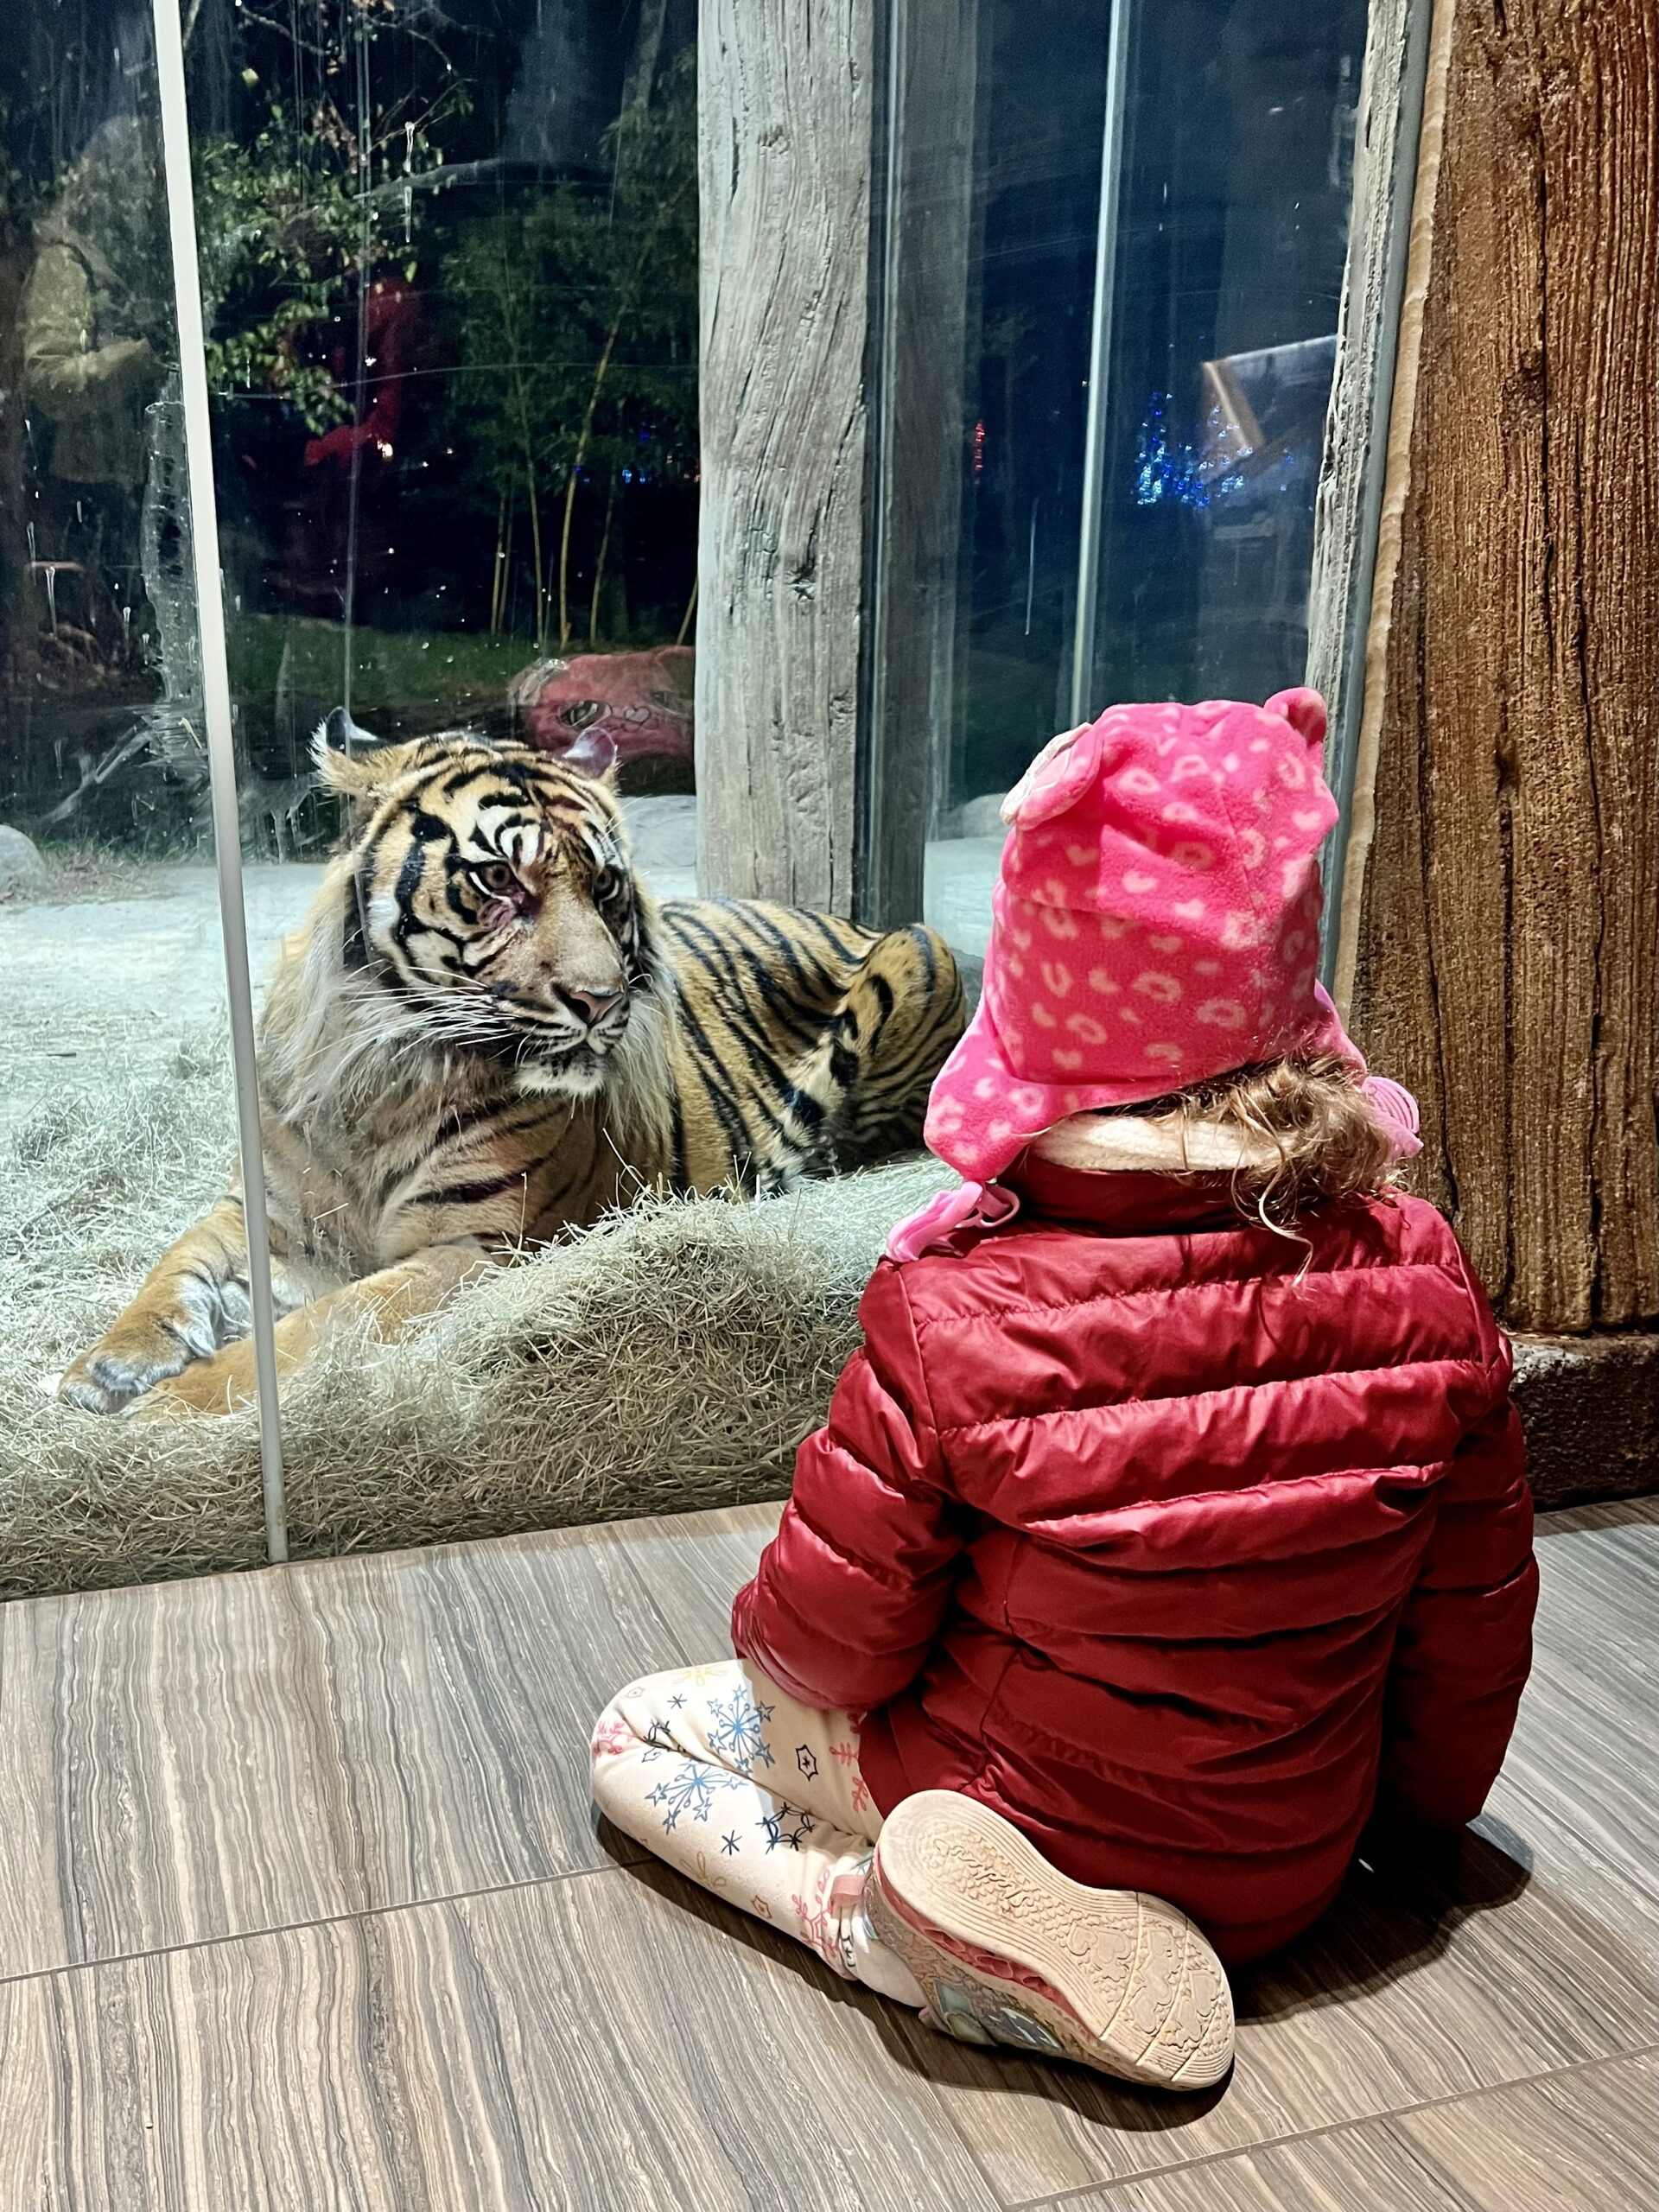 Marian and tiger, the kids are all right